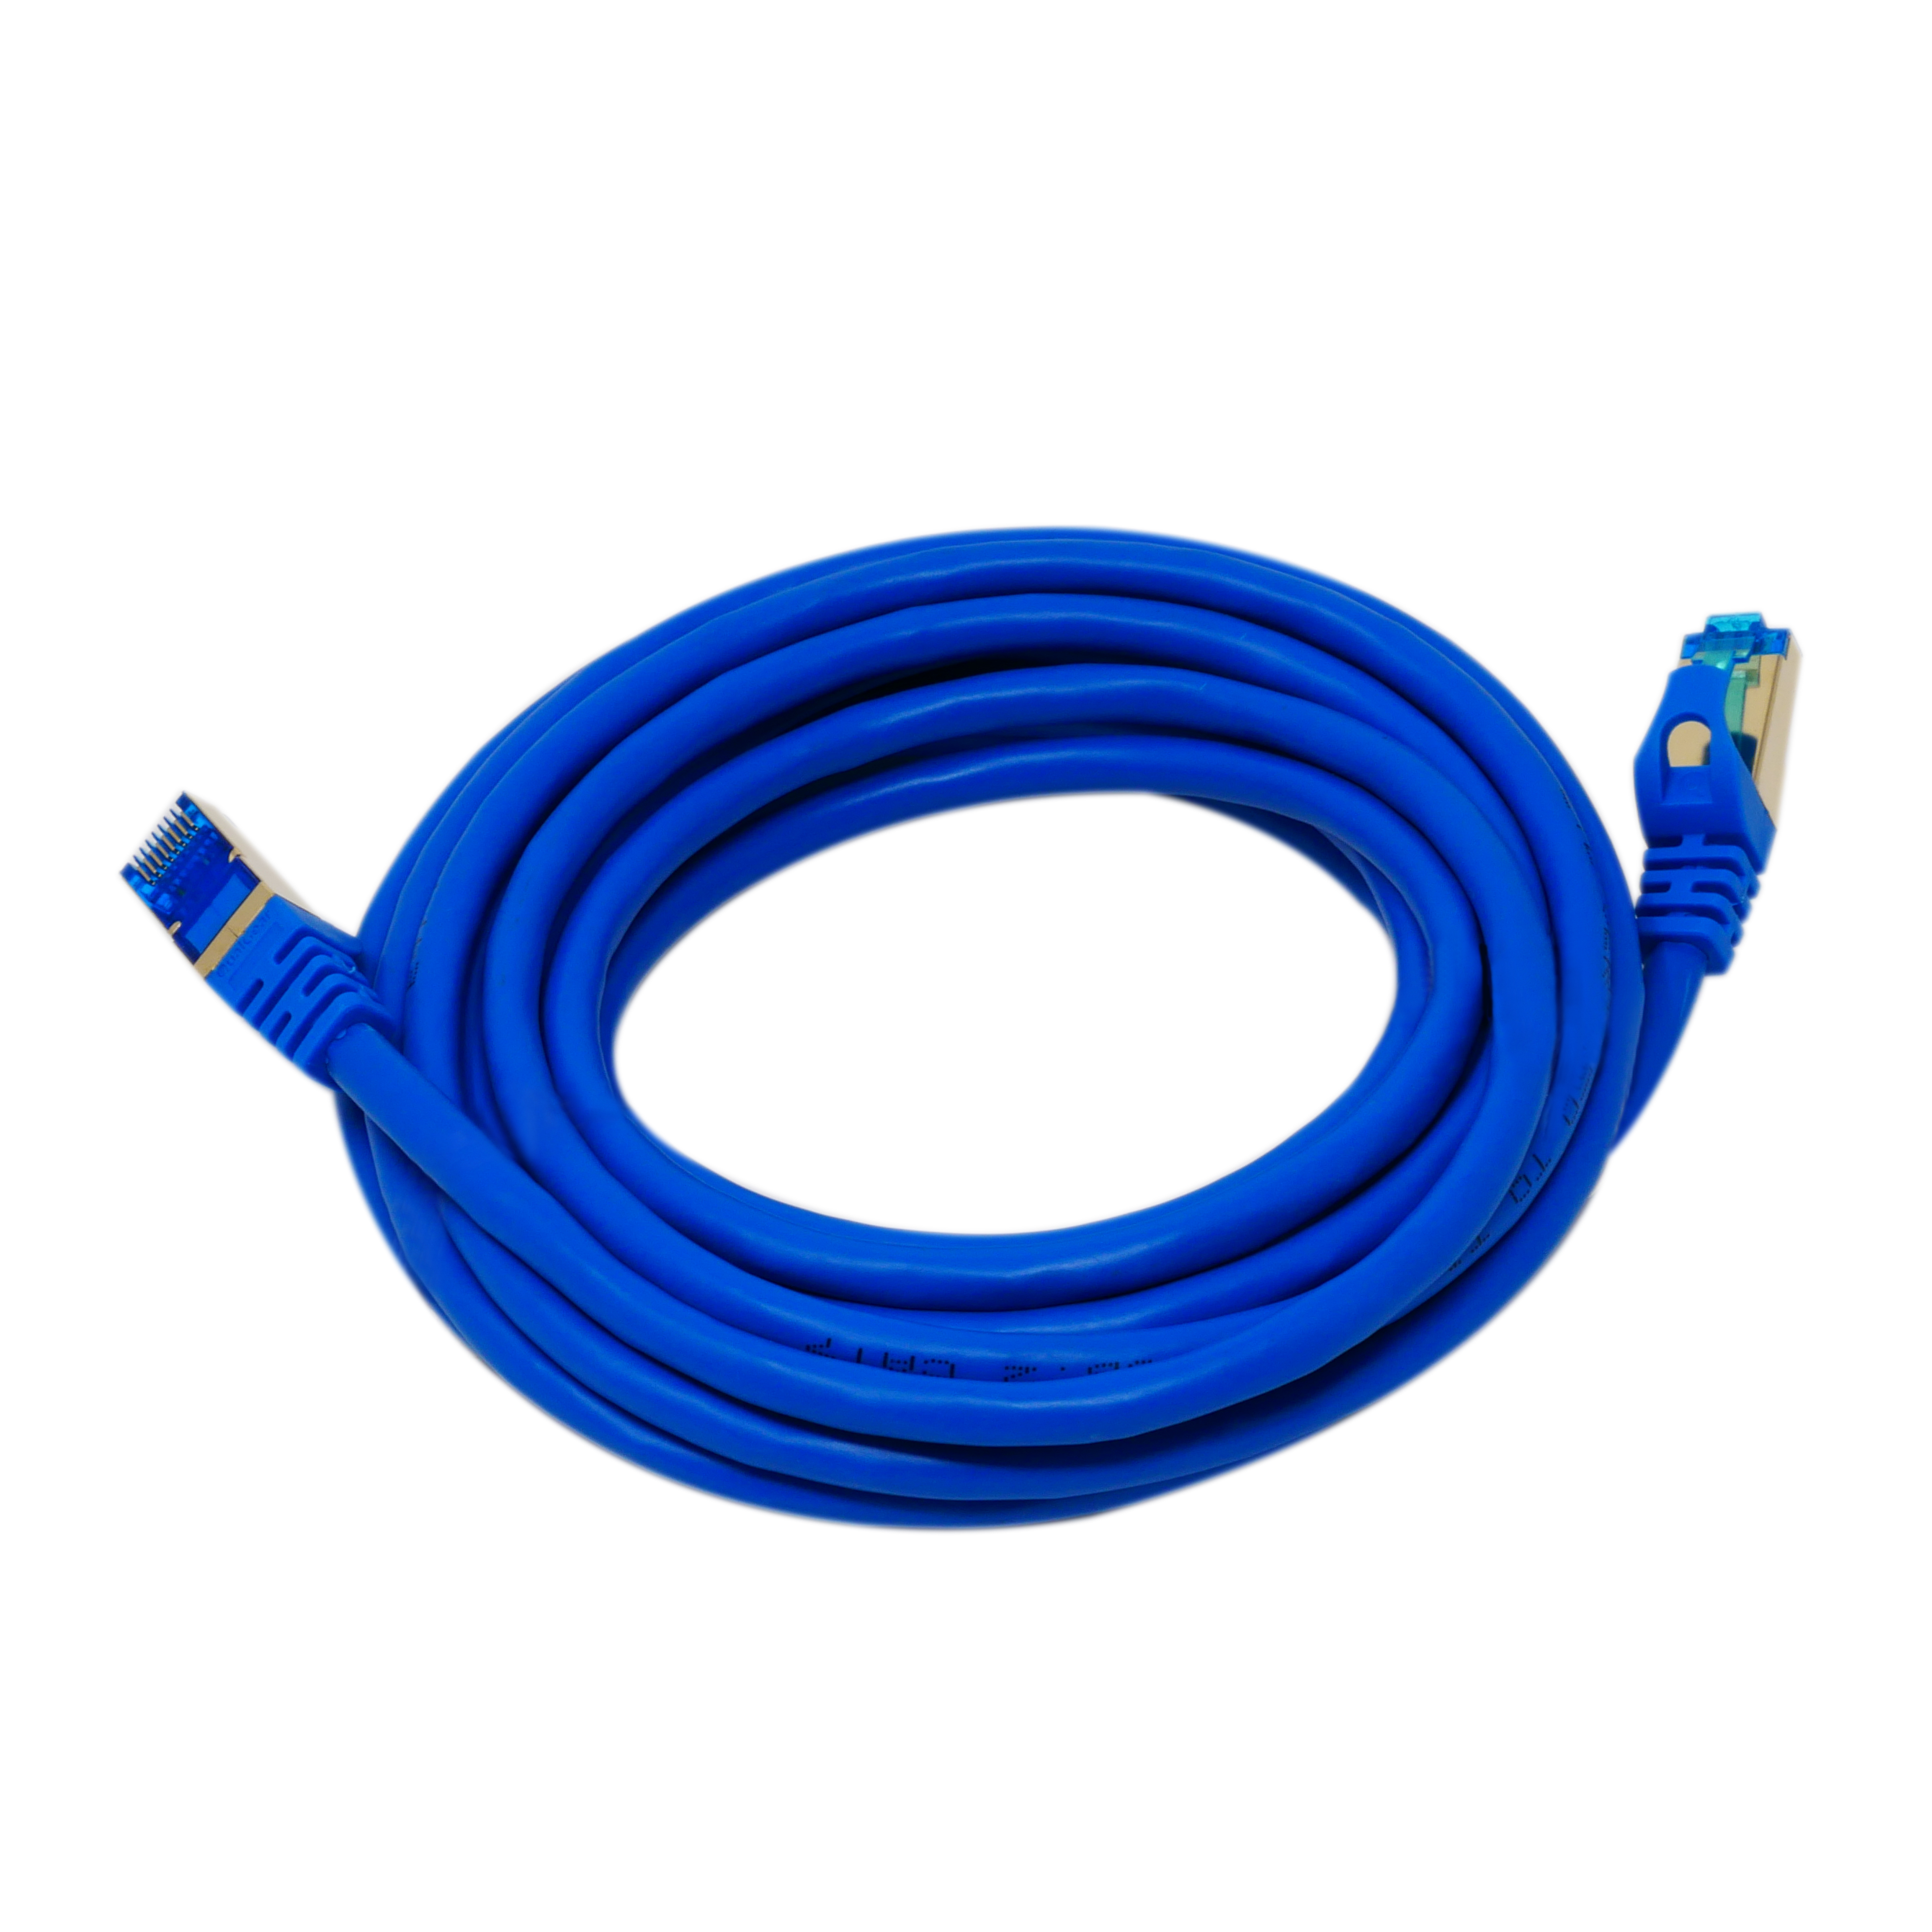 QualGear QG-CAT7R-15FT-BLU CAT 7 S/FTP Ethernet Cable Length 15 feet - 26 AWG, 10 Gbps, Gold Plated Contacts, RJ45, 99.99% OFC Copper, Color Blue 